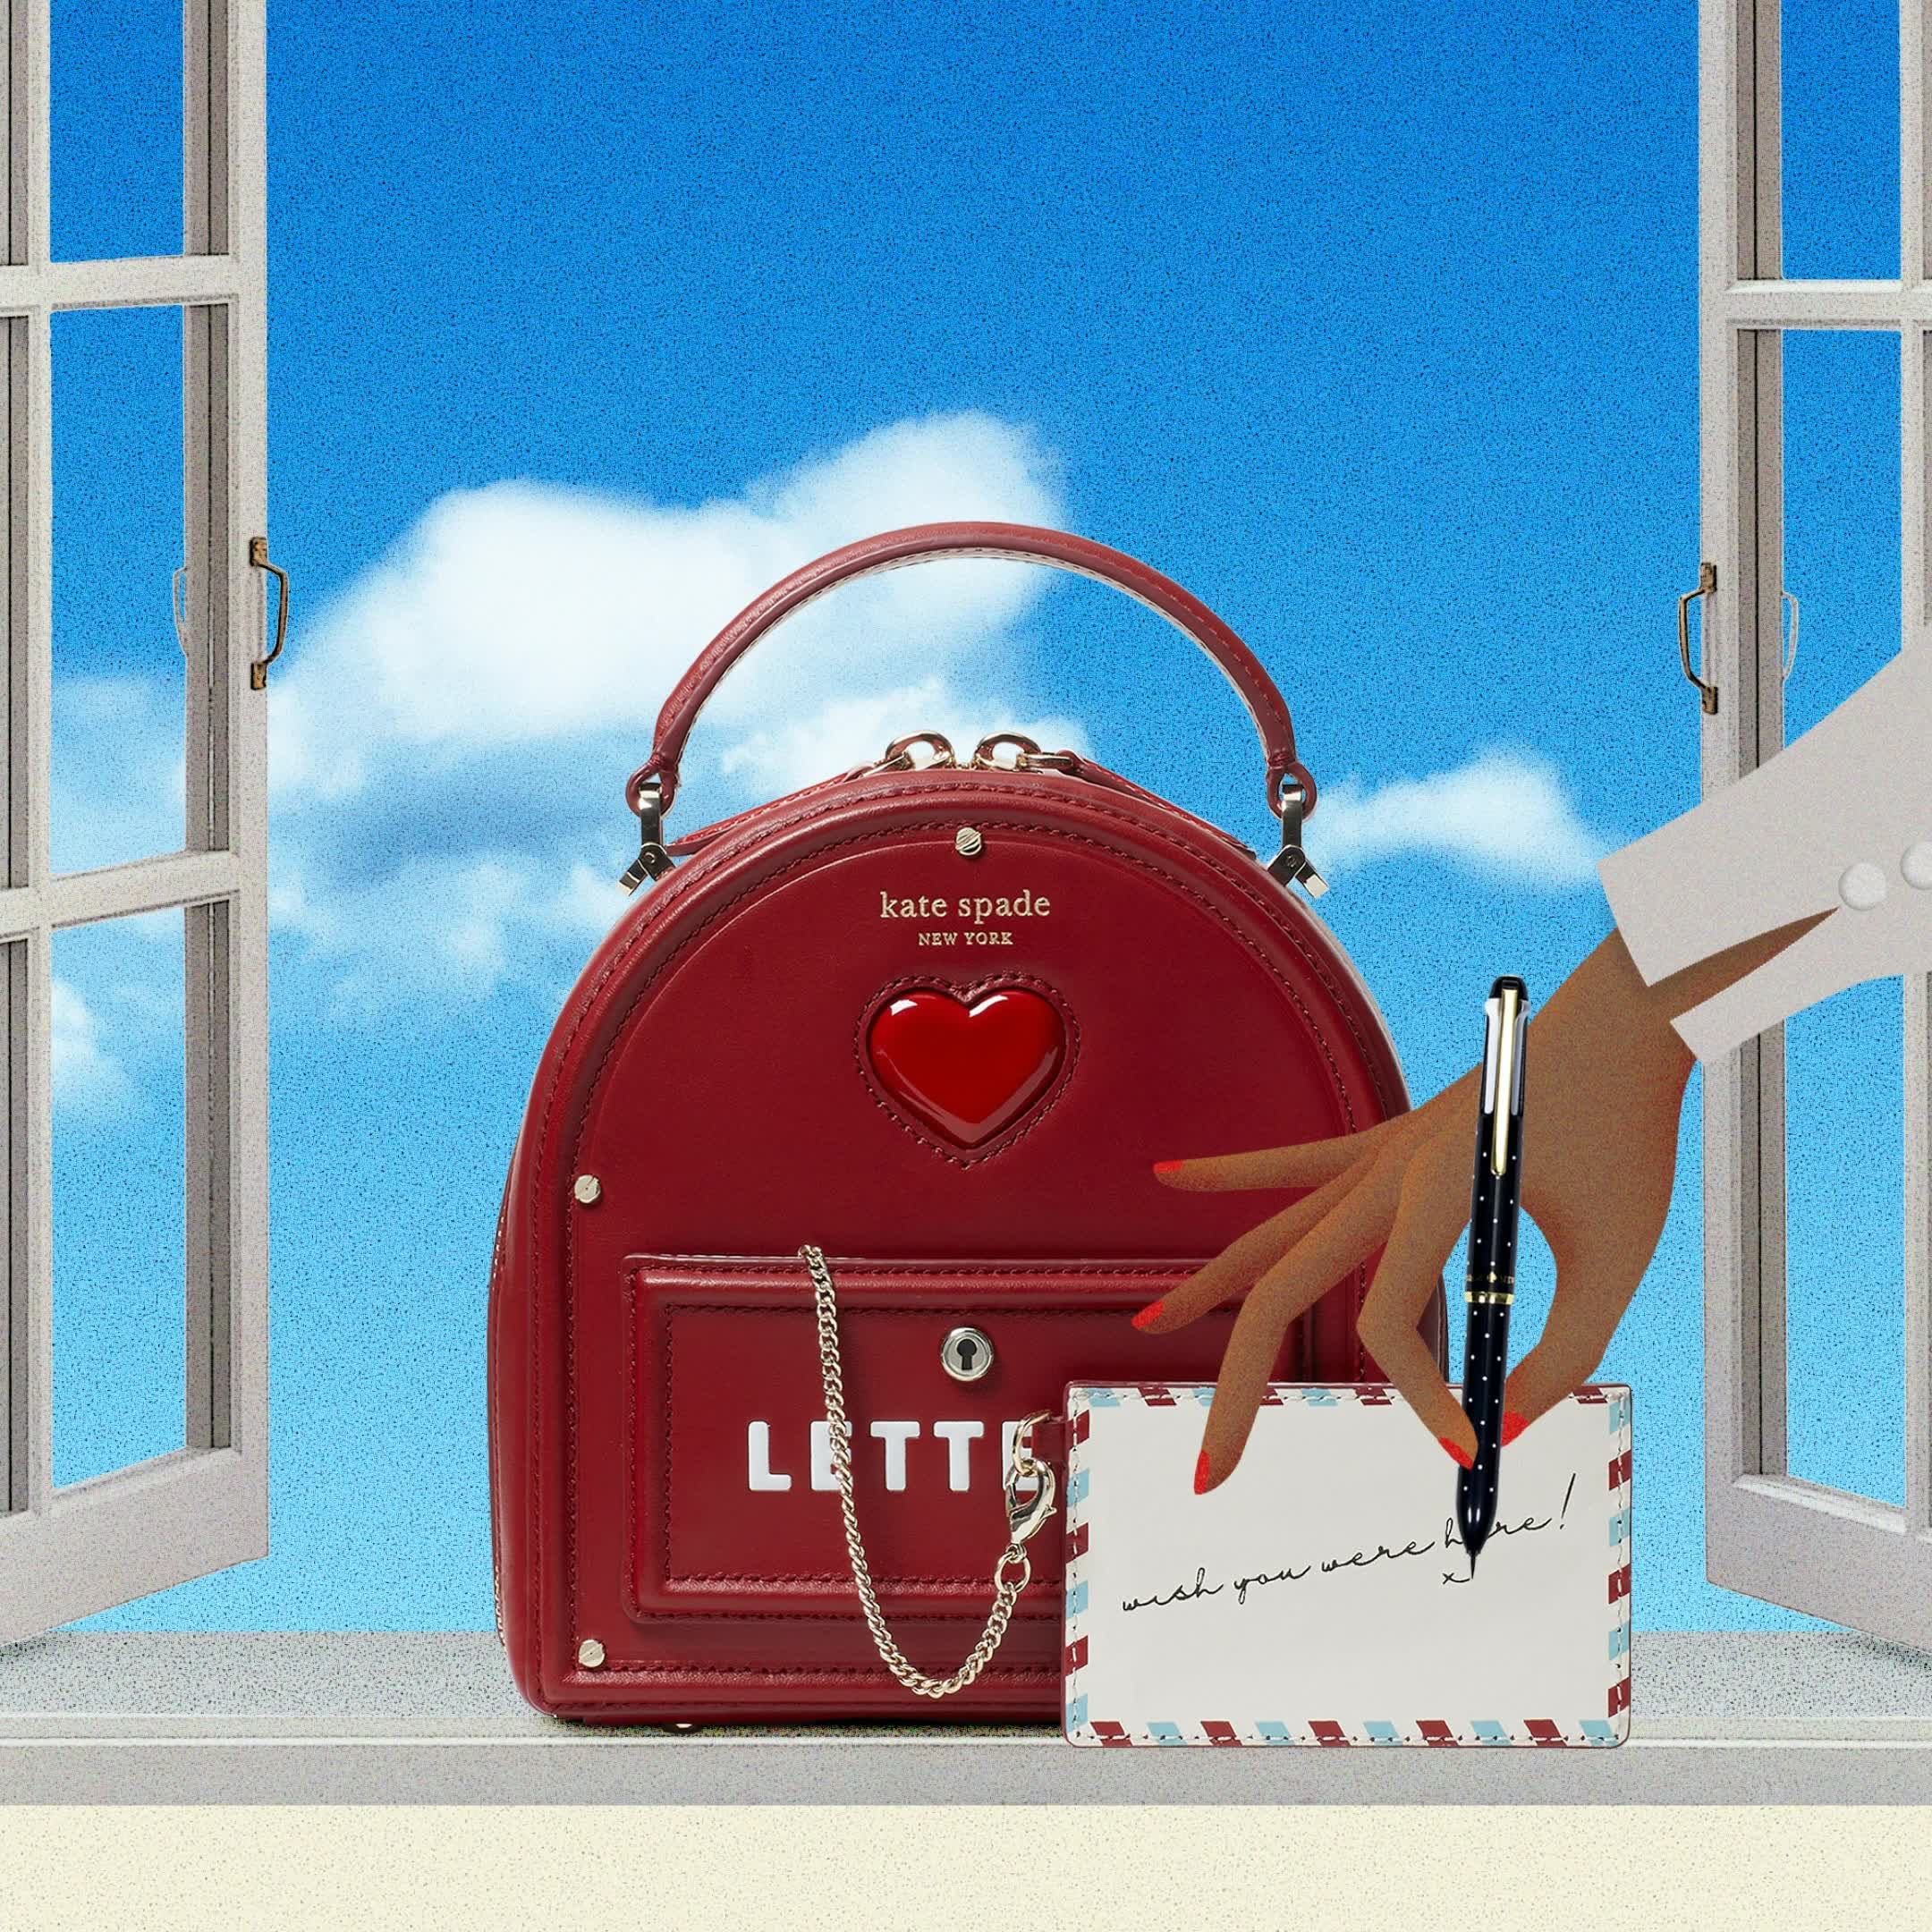 Look at this vintage design inspired by mailbox in London!🇬🇧 Carry it and call yourself a postwoman💌 Don't forget to join our memebership now to enjoy $200 welcome gift✨ #katespade #loveinspades